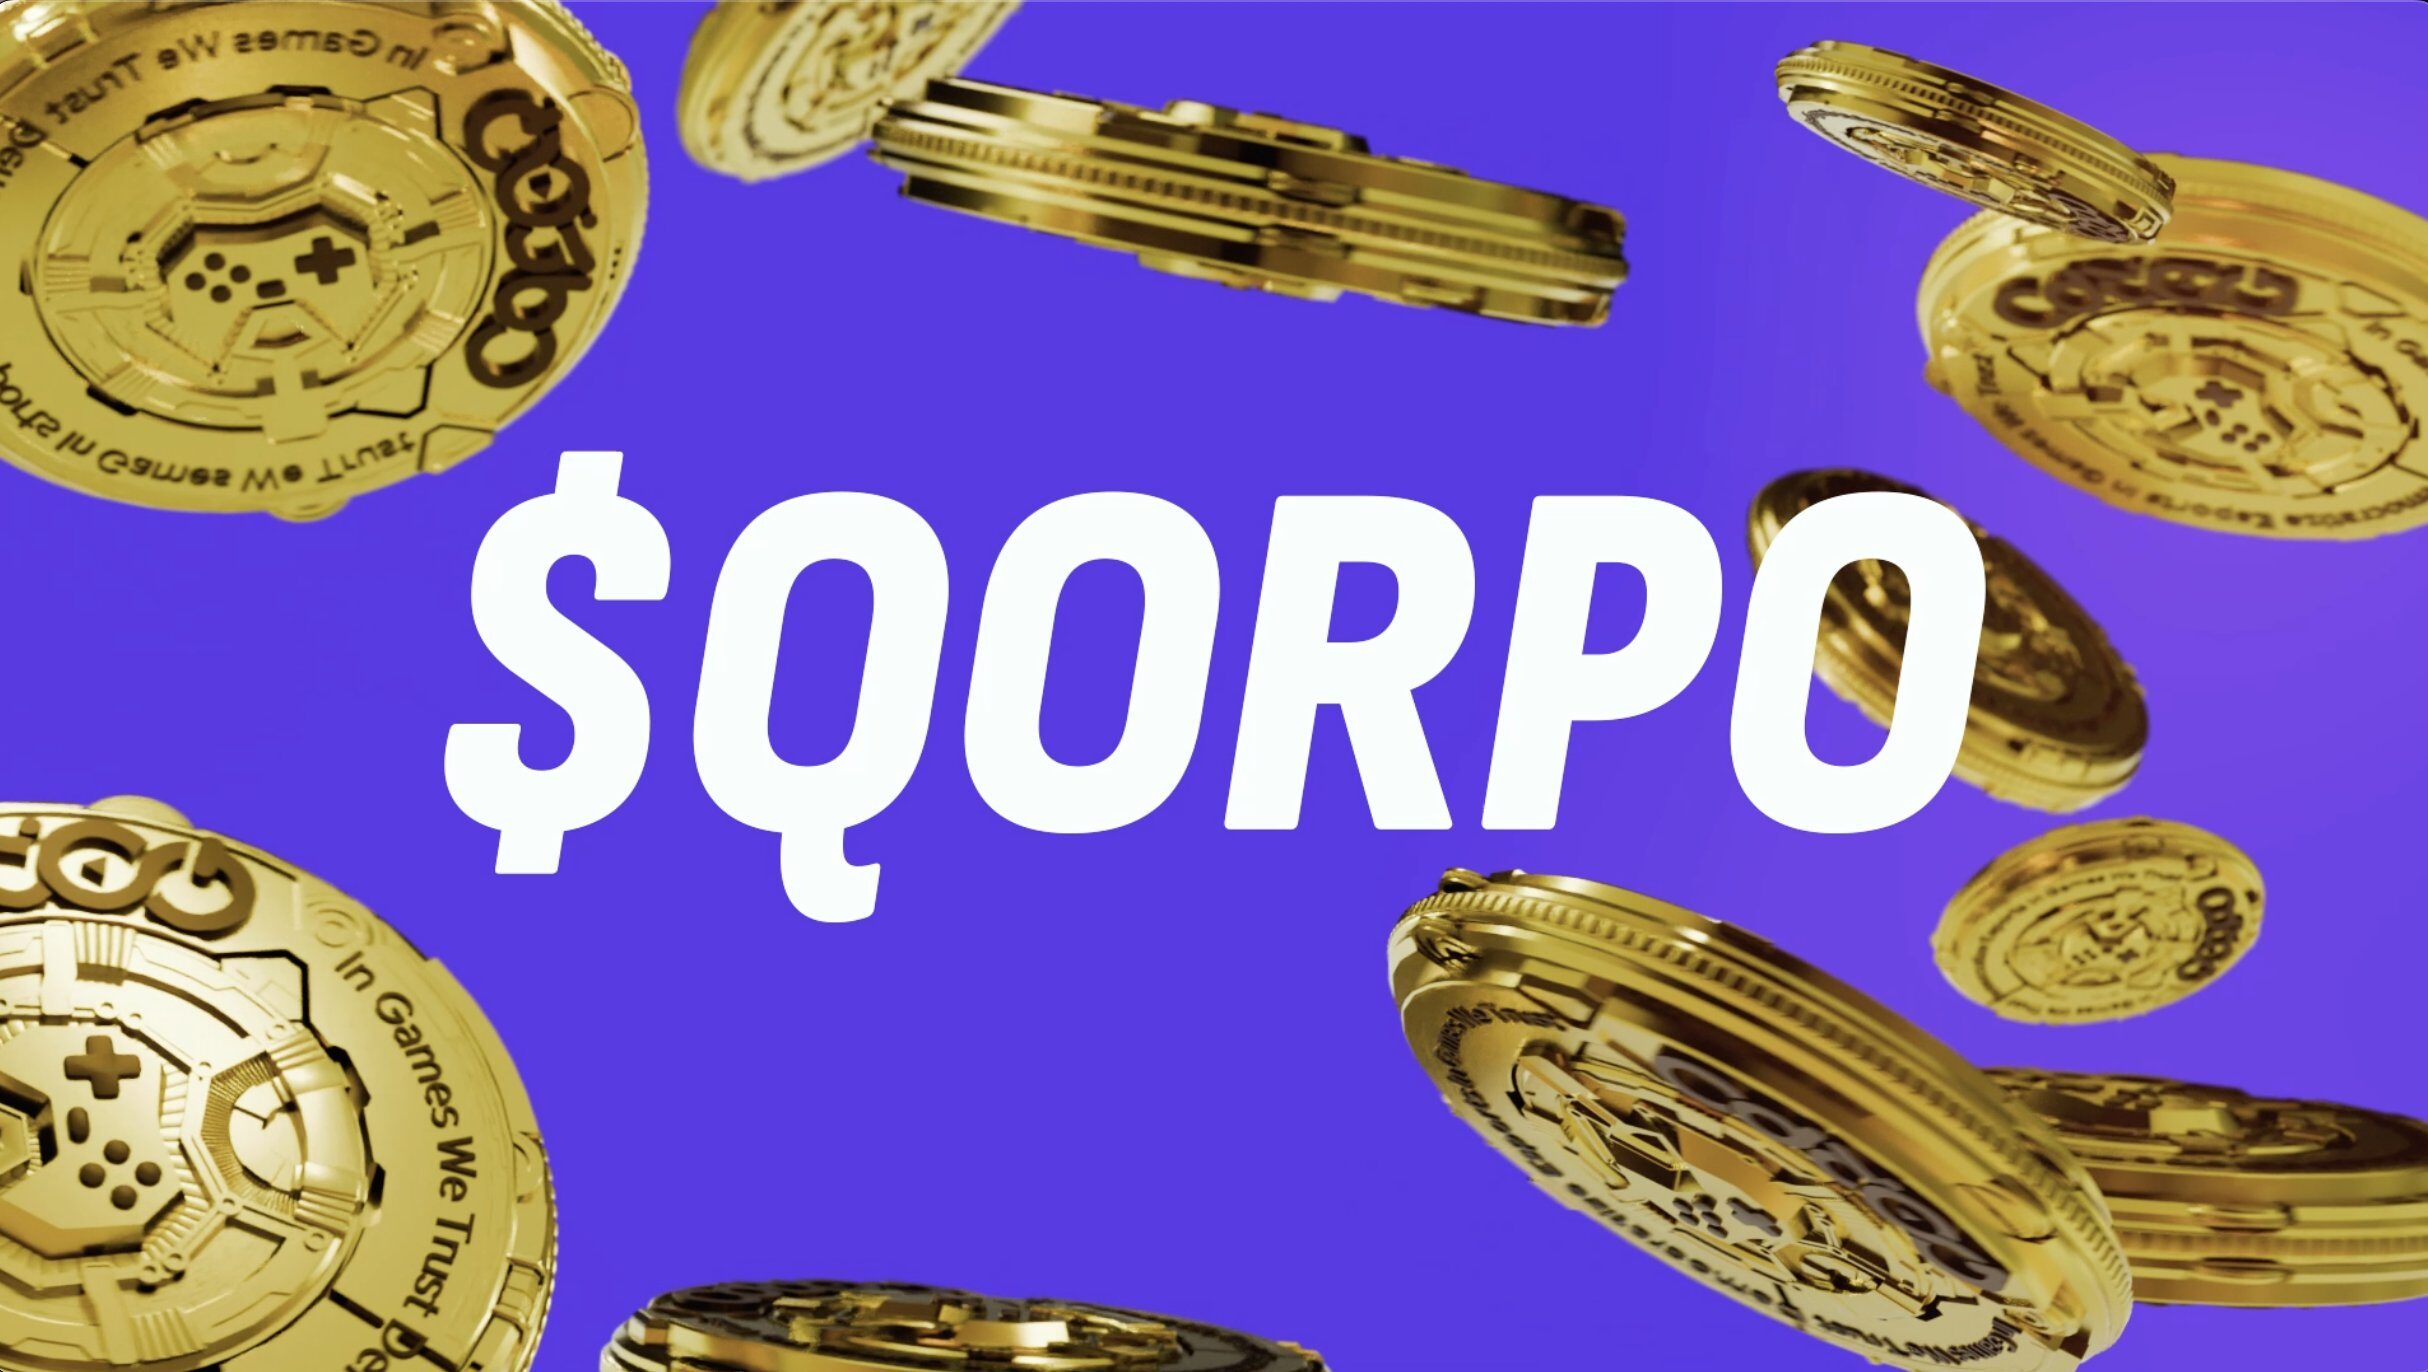 Play, Stake, and Participate to Earn QORPO Tokens